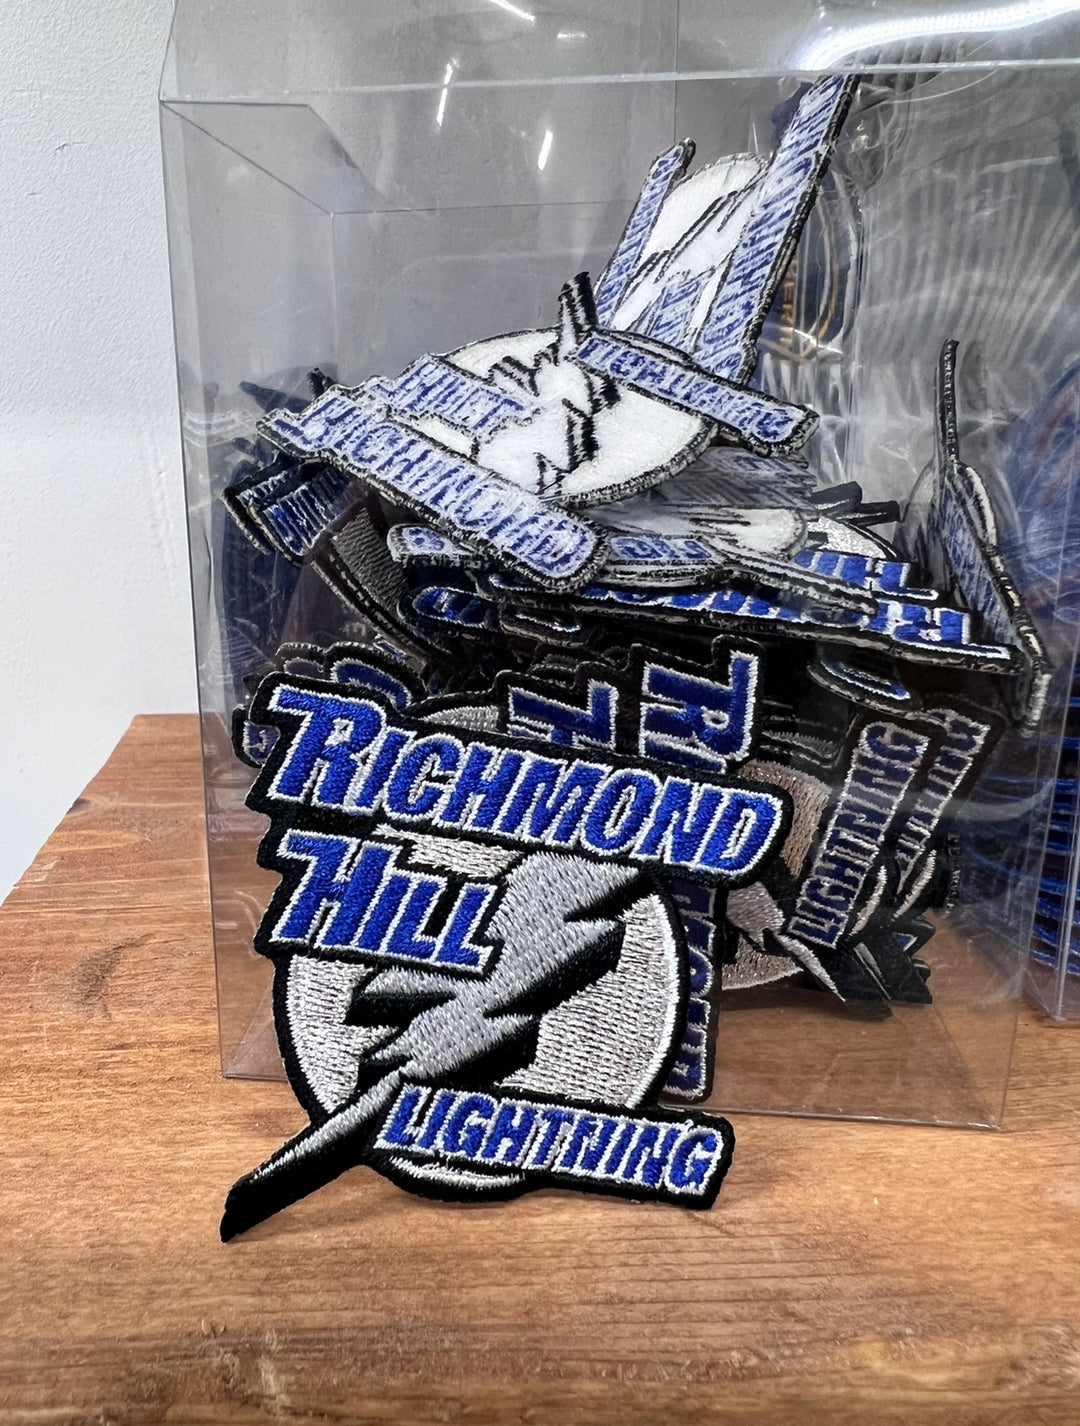 Richmond Hill Lightning Ringette Iron On or Sew On Patch